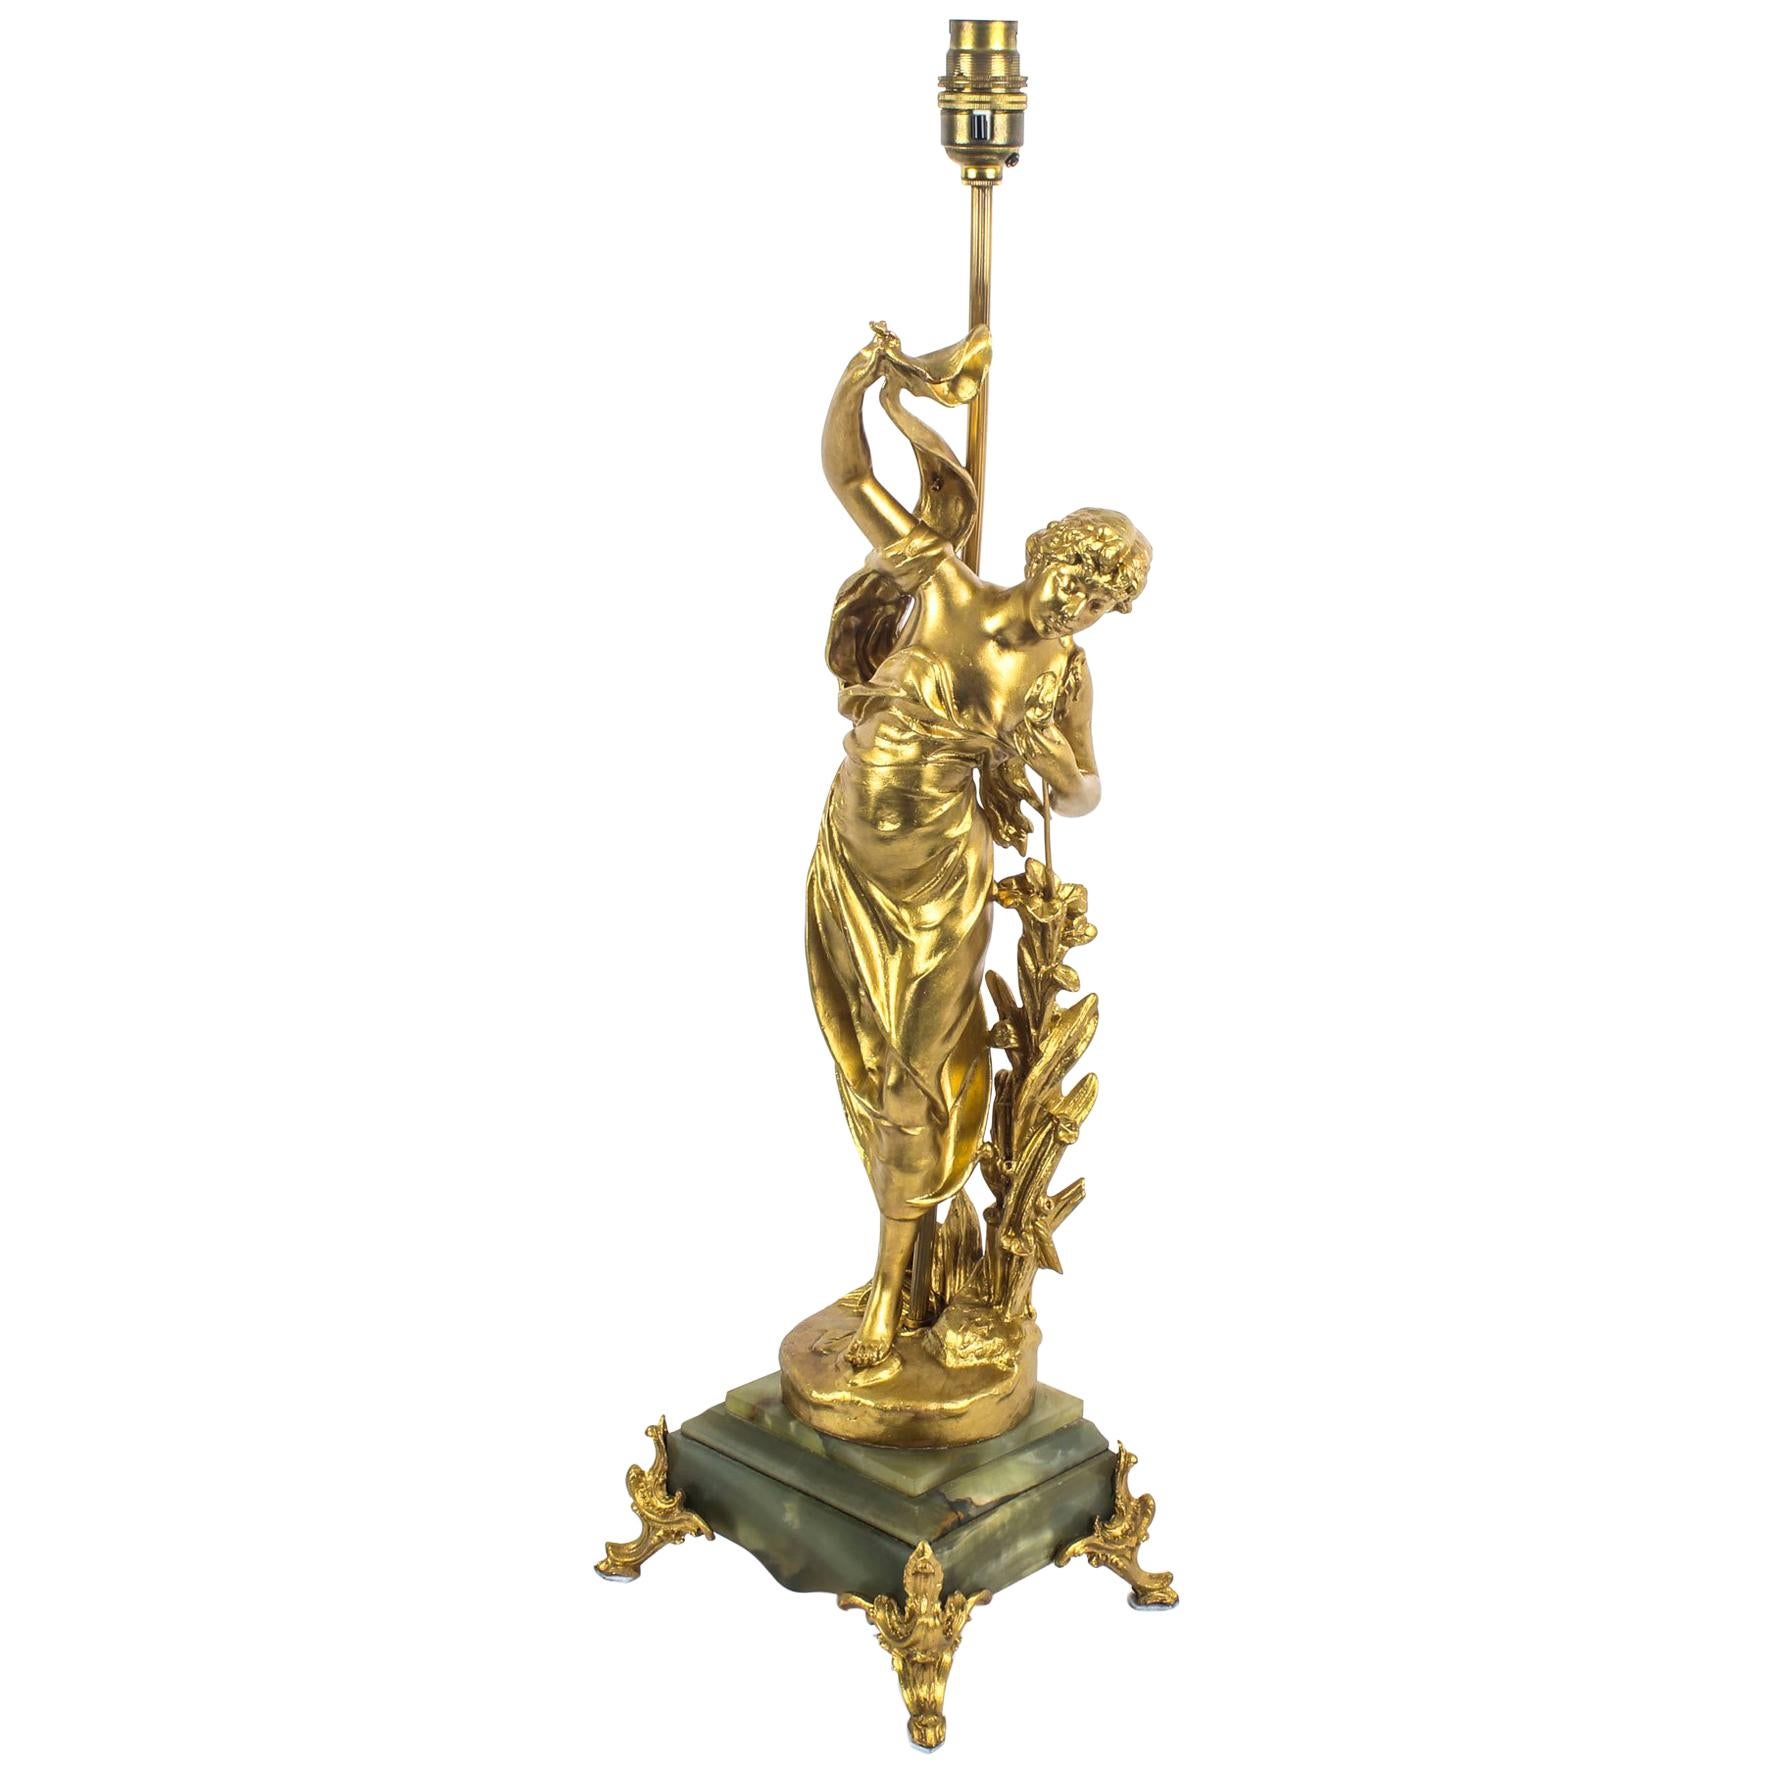 Early 20th Century Art Nouveau Gilded Dancing Lady Lamp